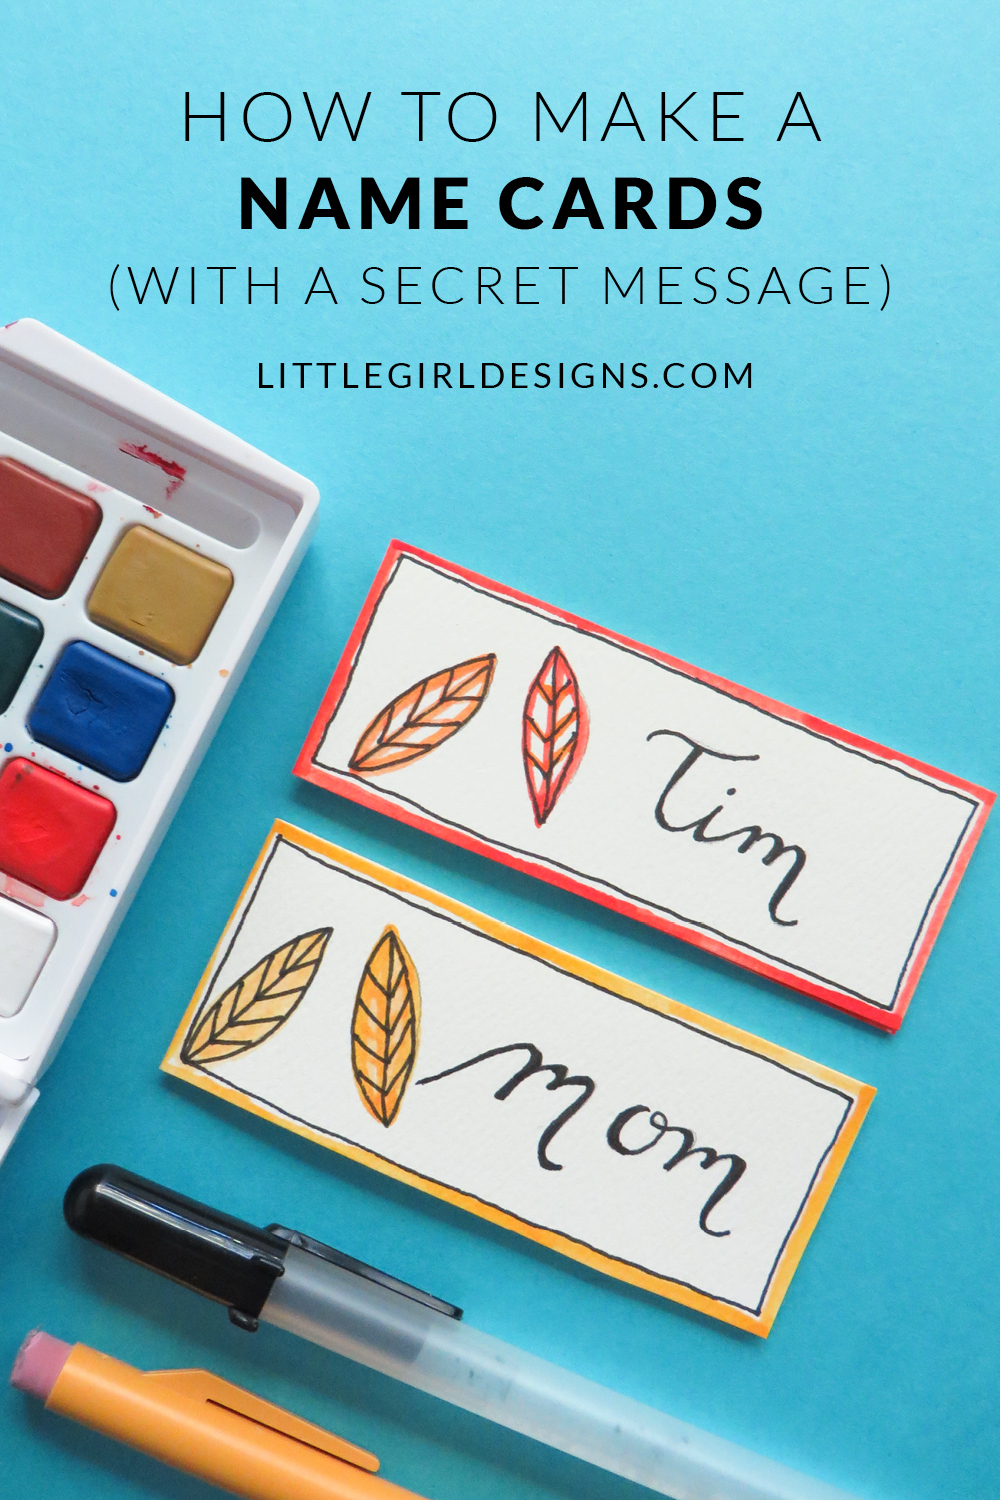 How to Make Name Cards (With a Secret Message) - Learn how to make simple and beautiful name cards for your special holiday meals with a twist. Each card has a secret message inside! A great way to show your guests that you care. @ littlegirldesigns.com